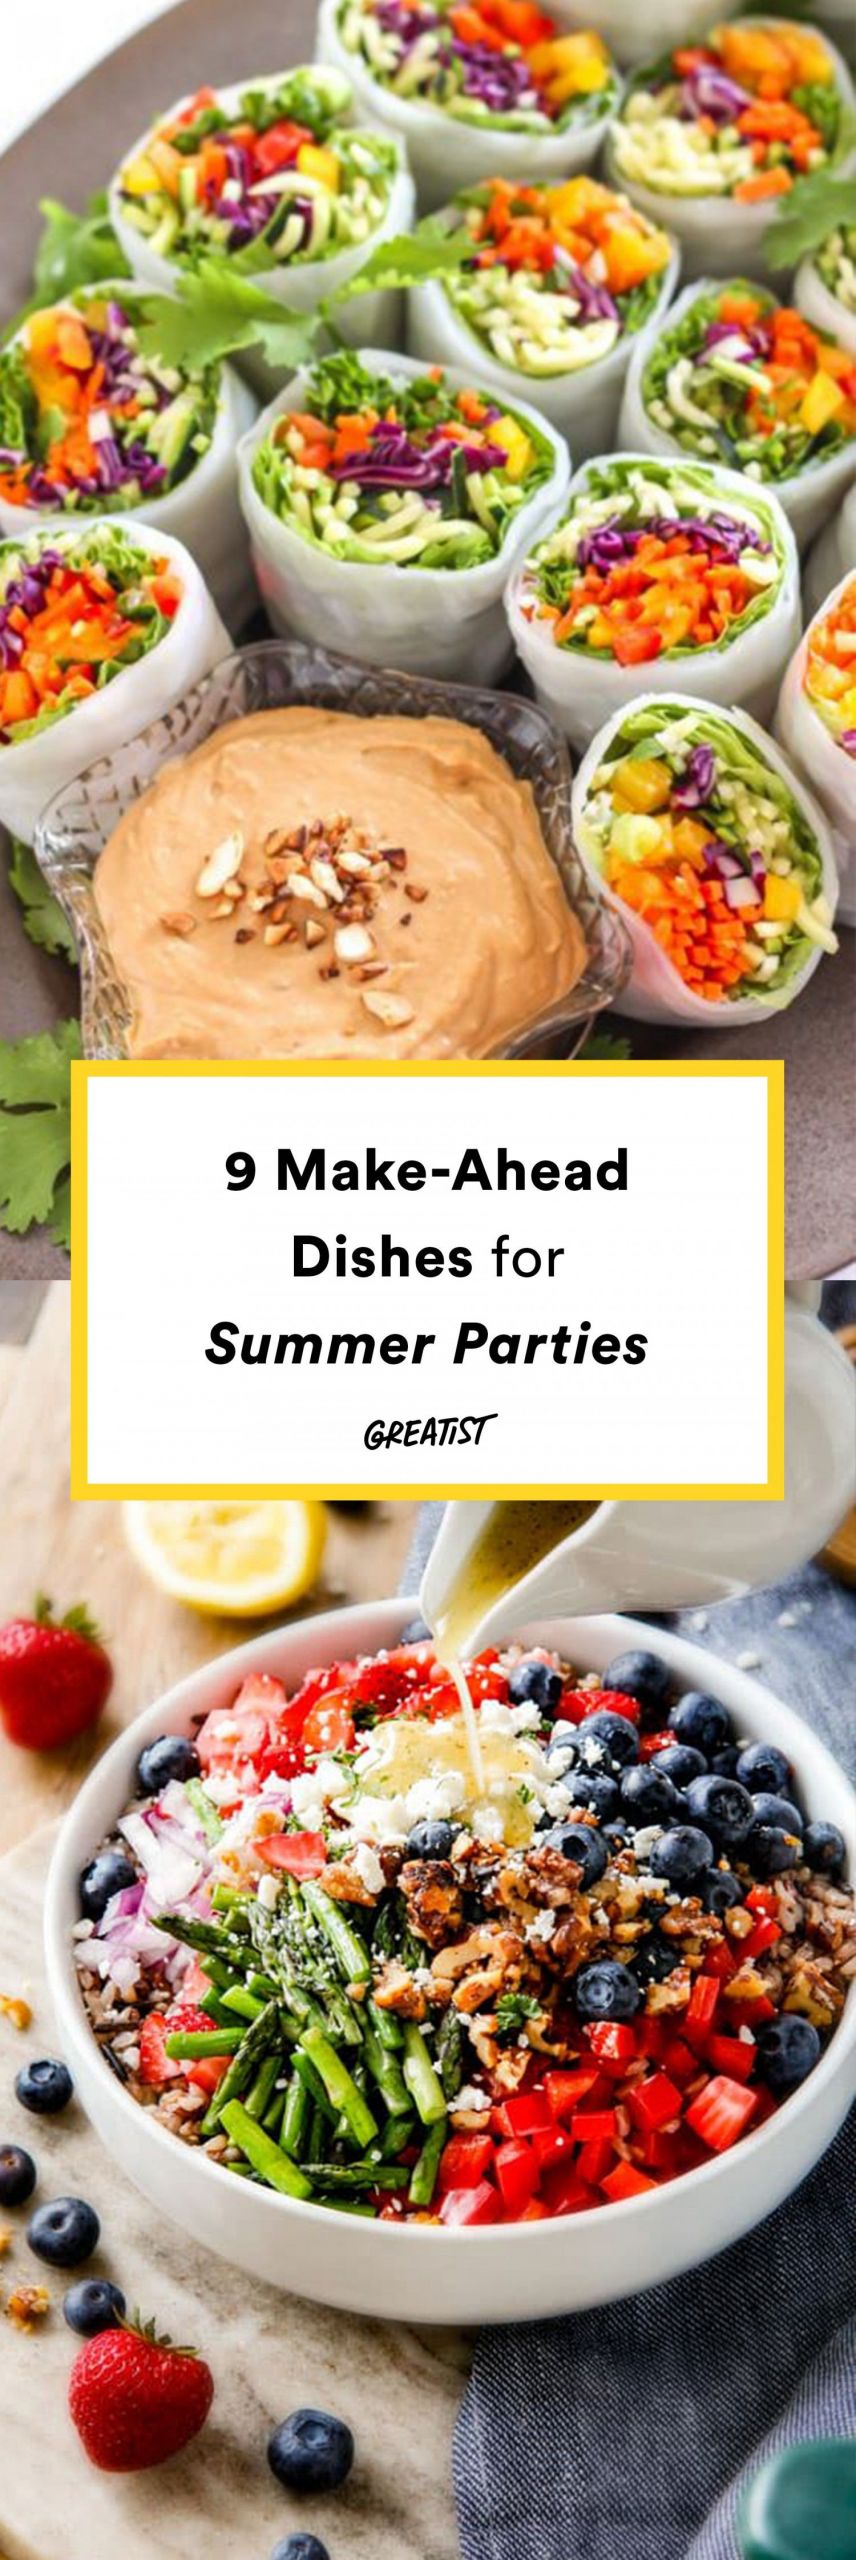 Pool Party Food Menu Ideas
 9 Make Ahead Dishes for Summer Parties